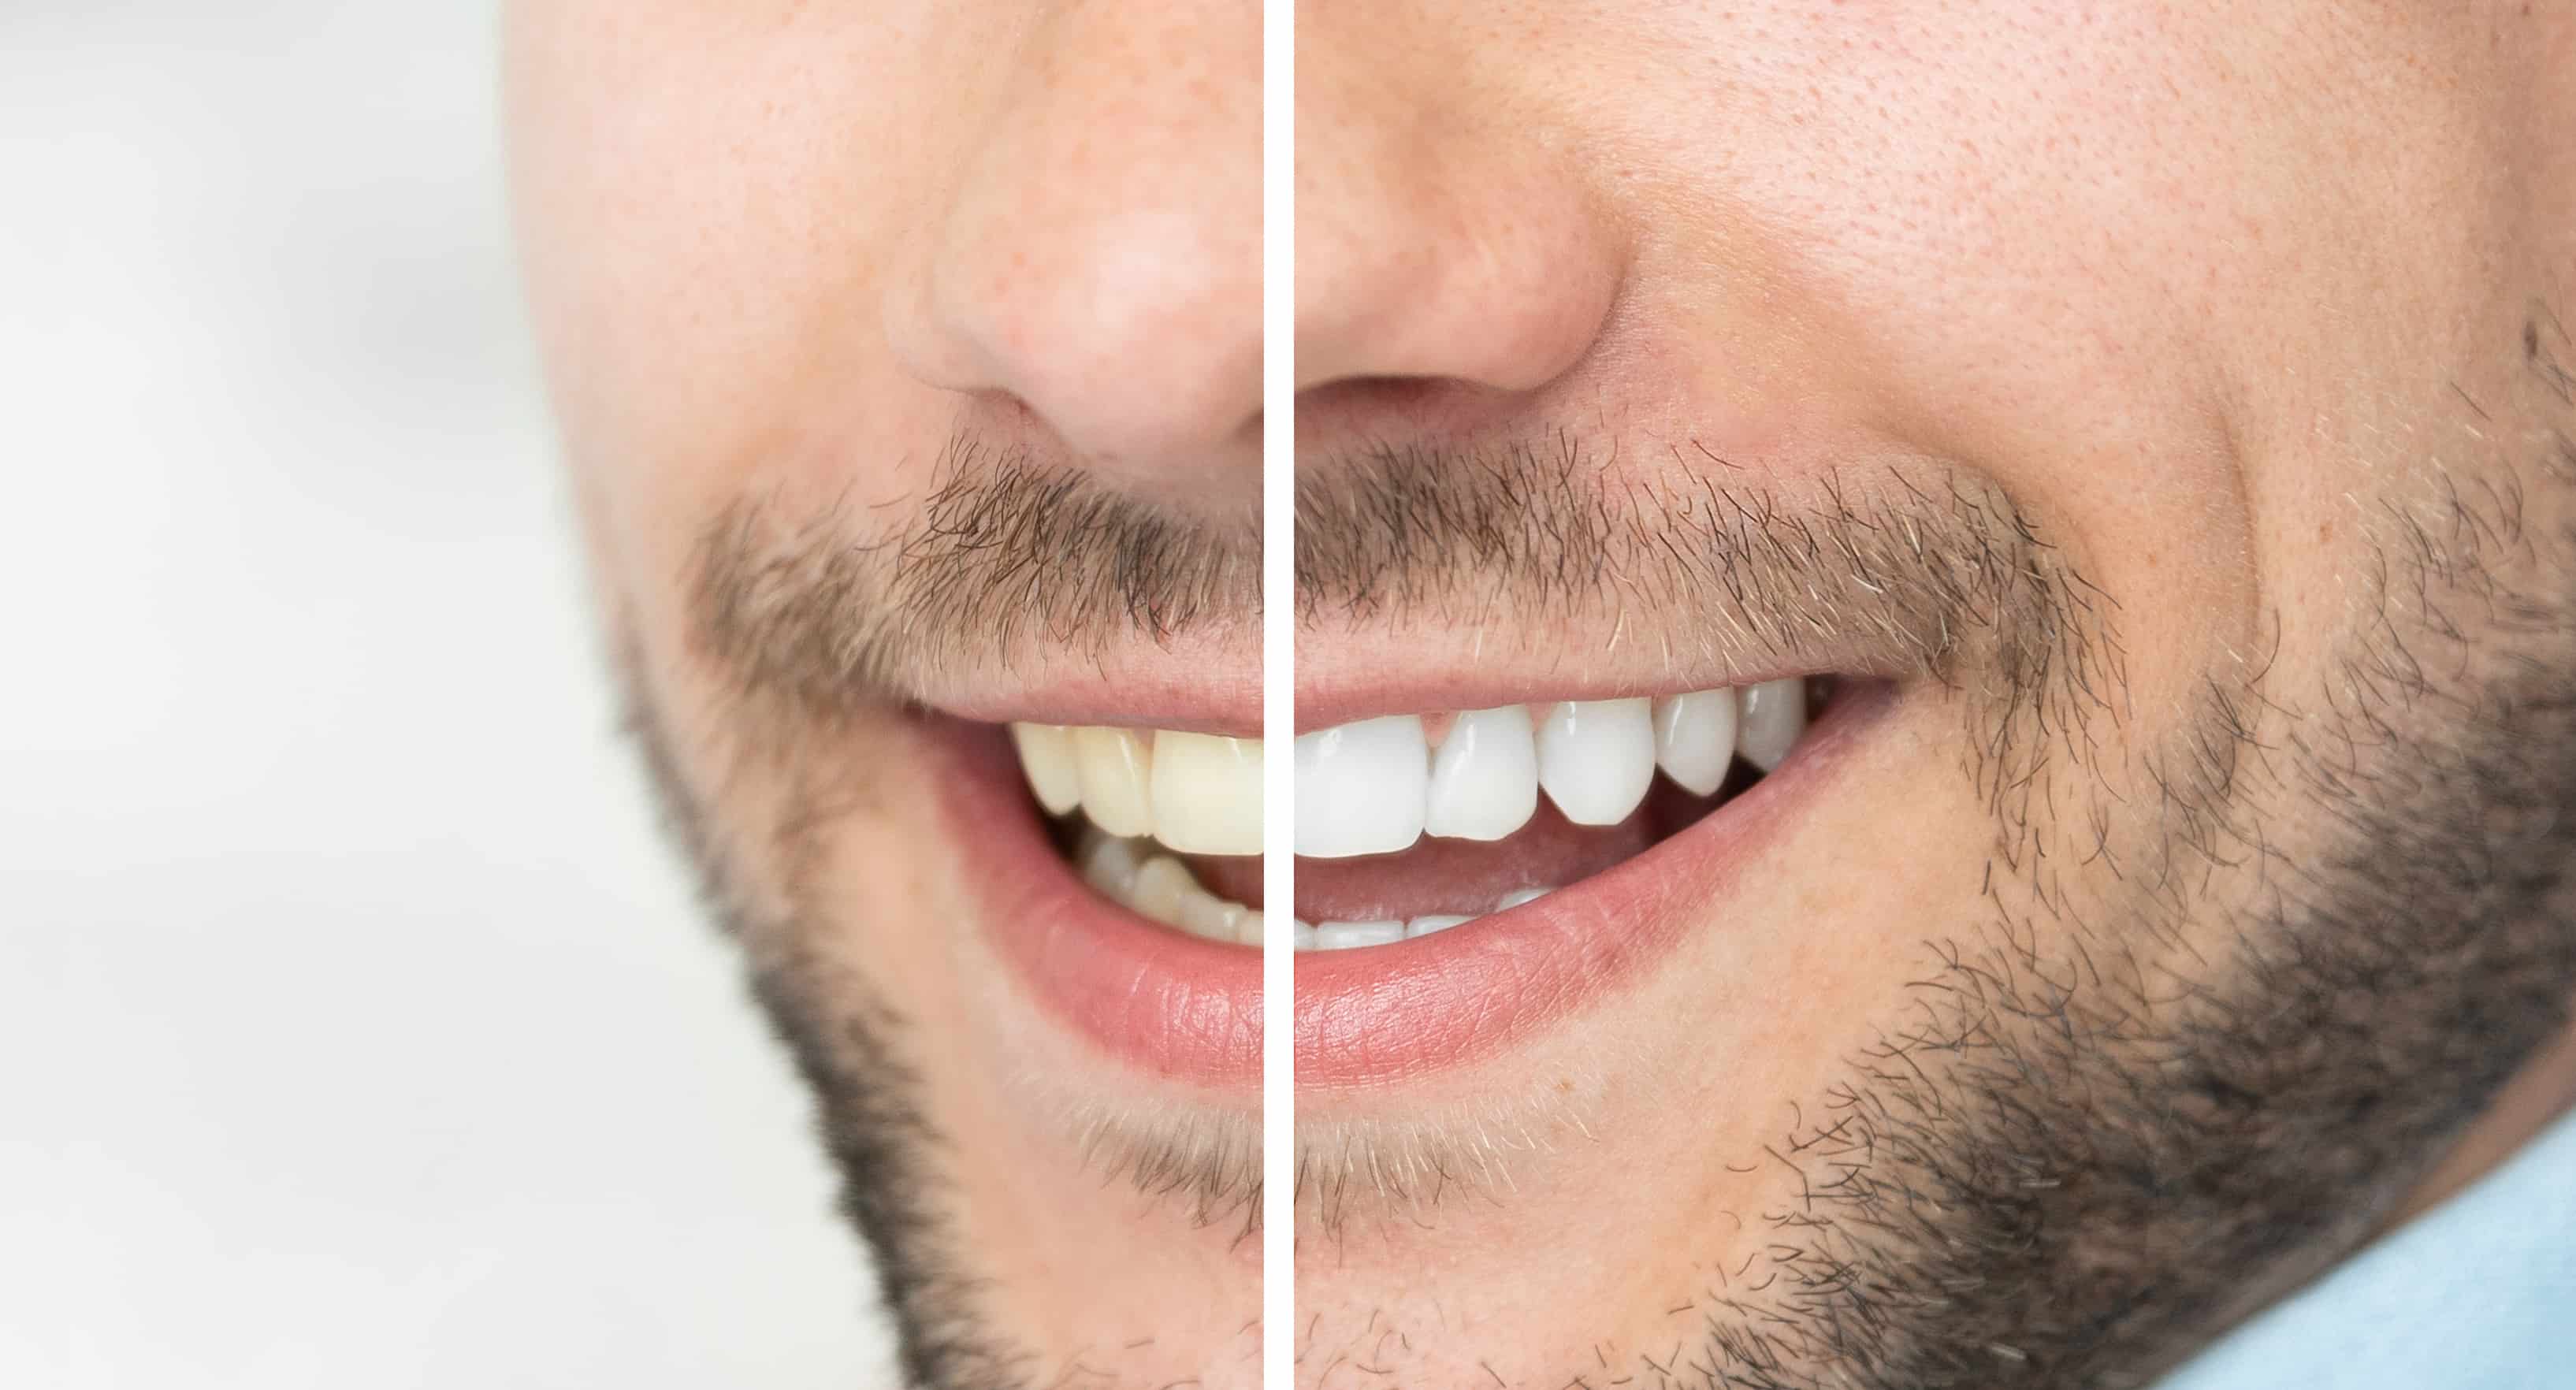 How long does it take to whiten teeth?